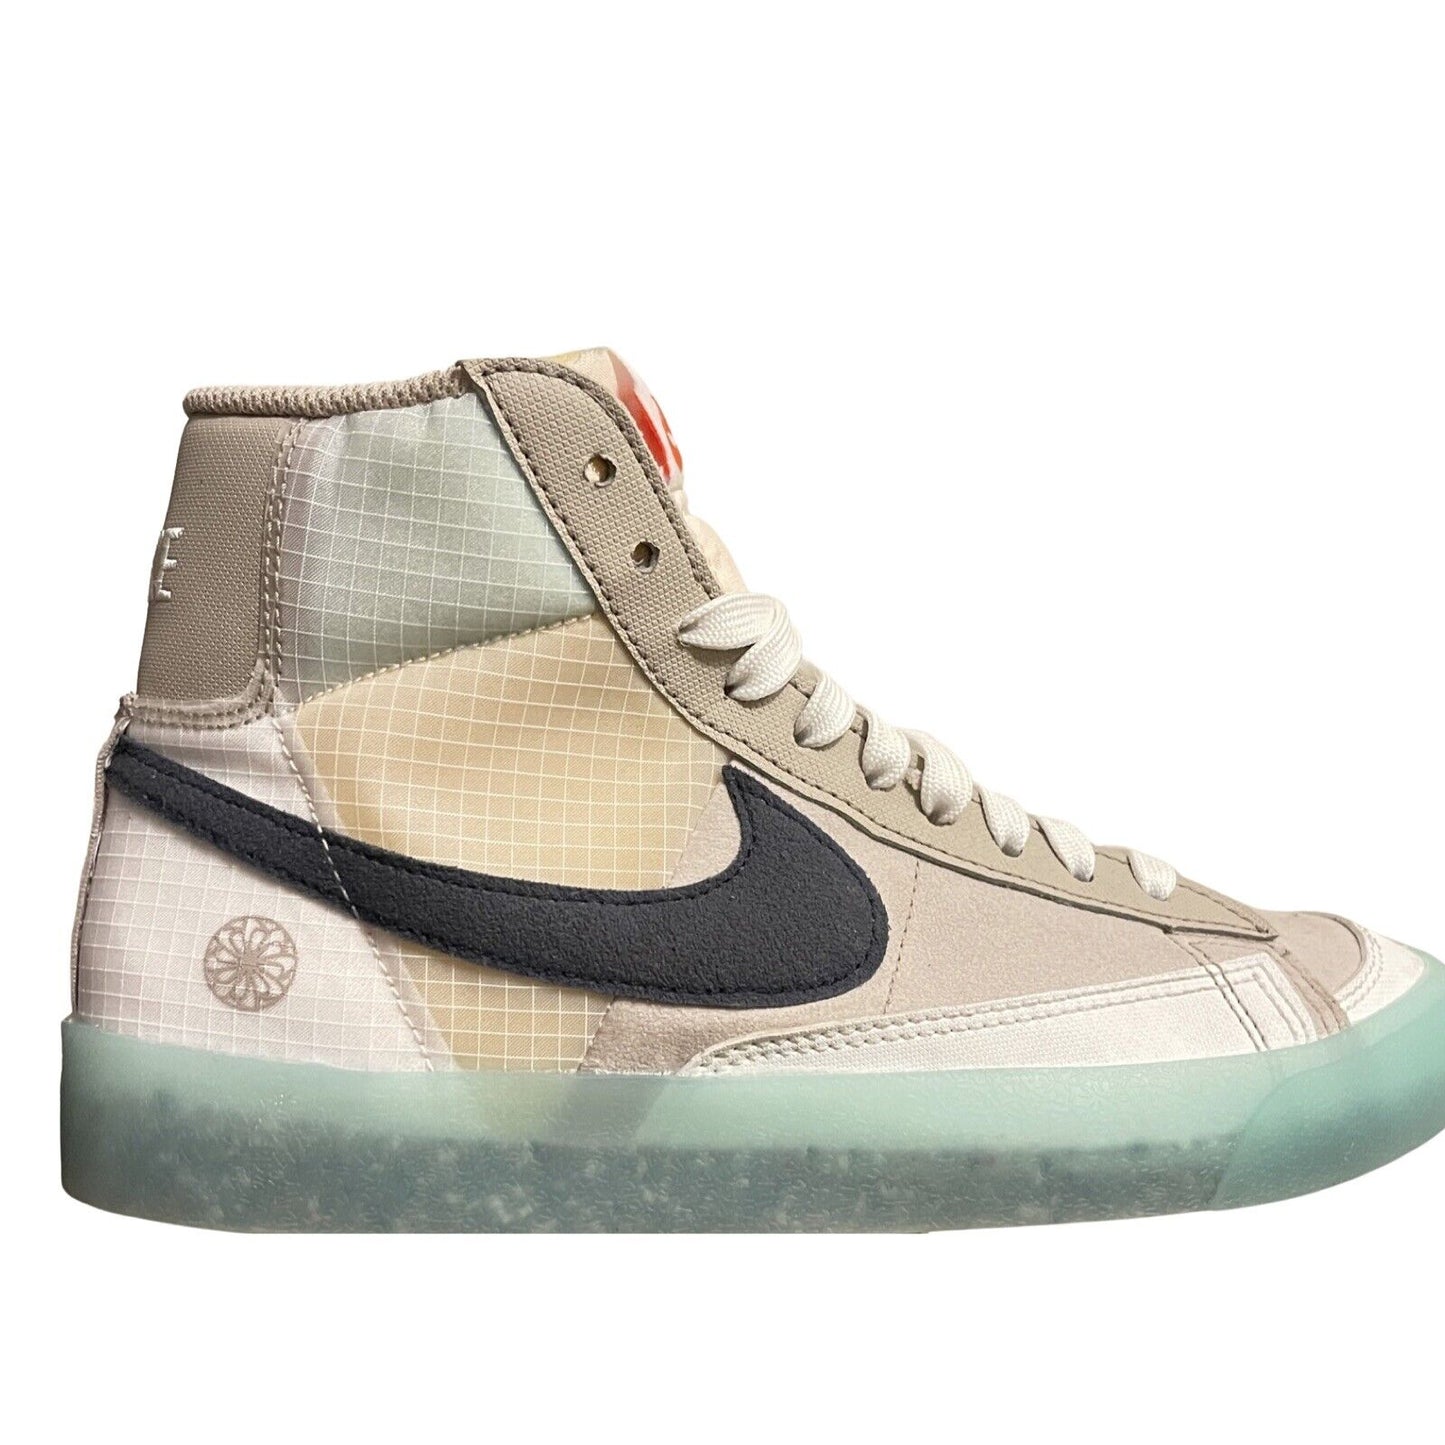 Nike Blazer Mid 77 GS Move To Zero Youth 6Y SINGLE SHOE Right Foot One Sneaker